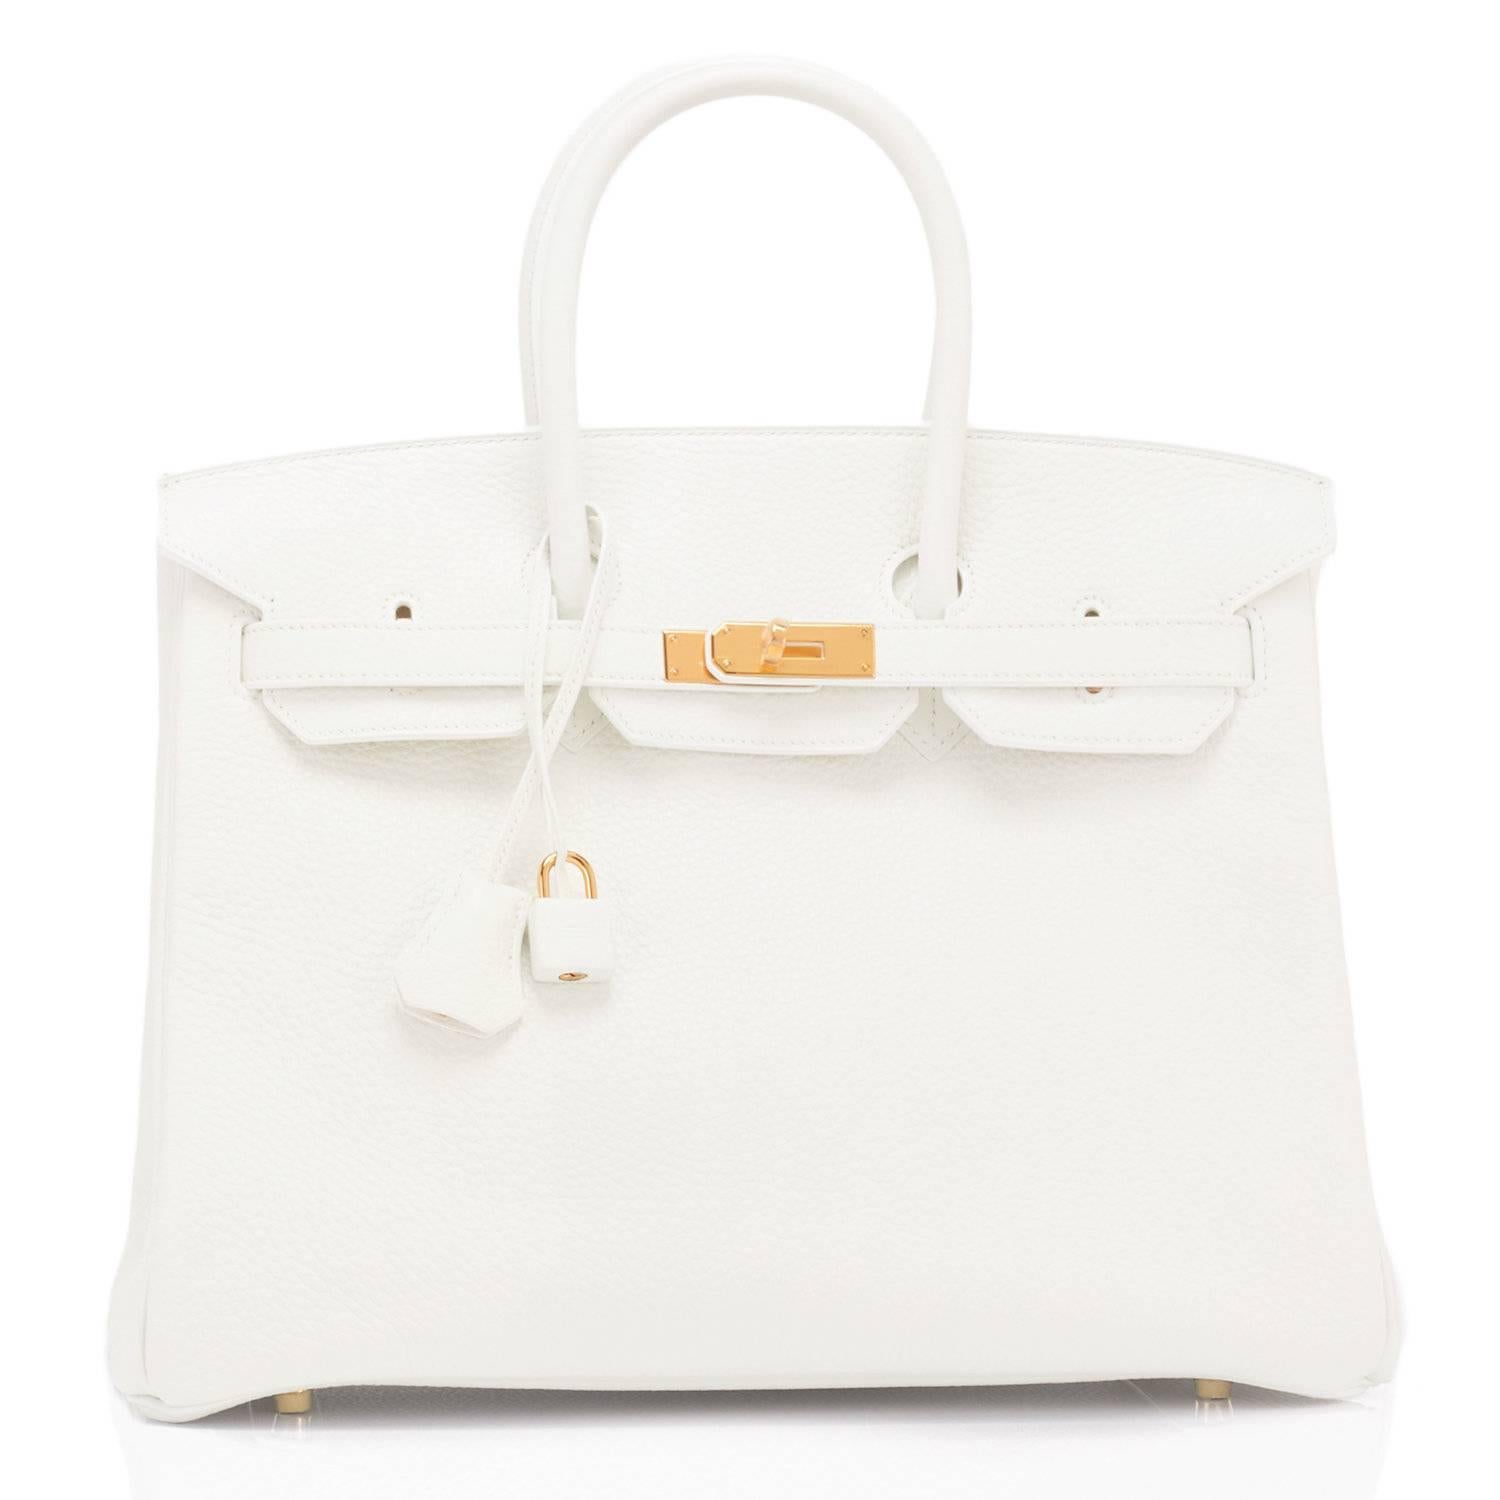 Hermes White 35cm Clemence Birkin Gold Hardware
Exceedingly rare pristine condition White Birkin 35cm with Gold Hardware!
Perfect gift! Comes full set with keys, lock, clochette, a sleeper for the bag, rain protector, and Hermes box.
New or Never